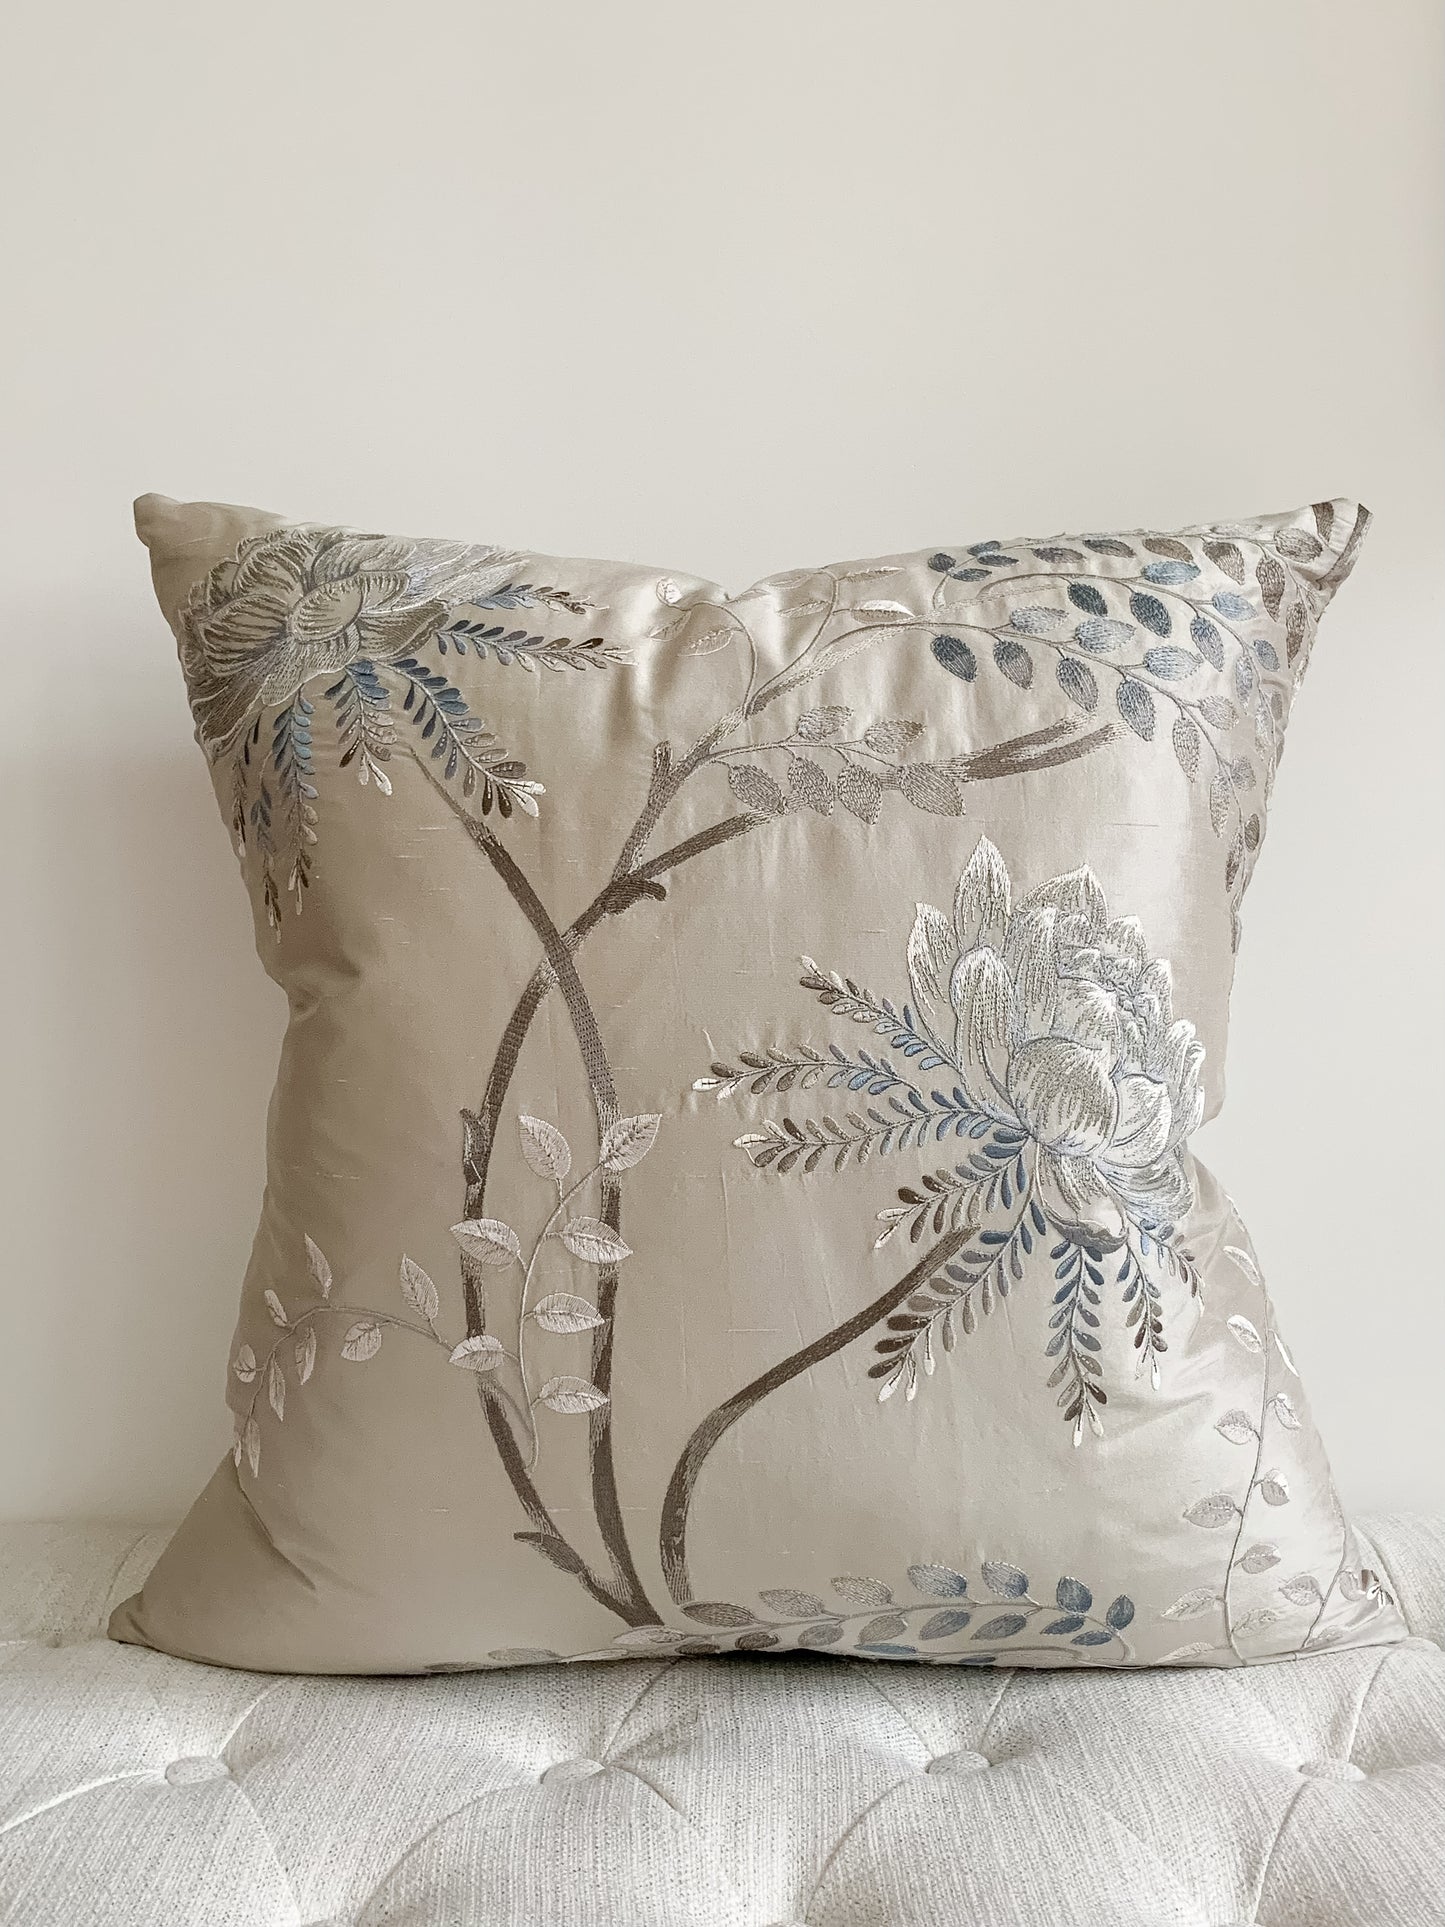 Silk designer accent pillow with flowers and branches.  Light blue petals and leaves on a shimmery taupe background